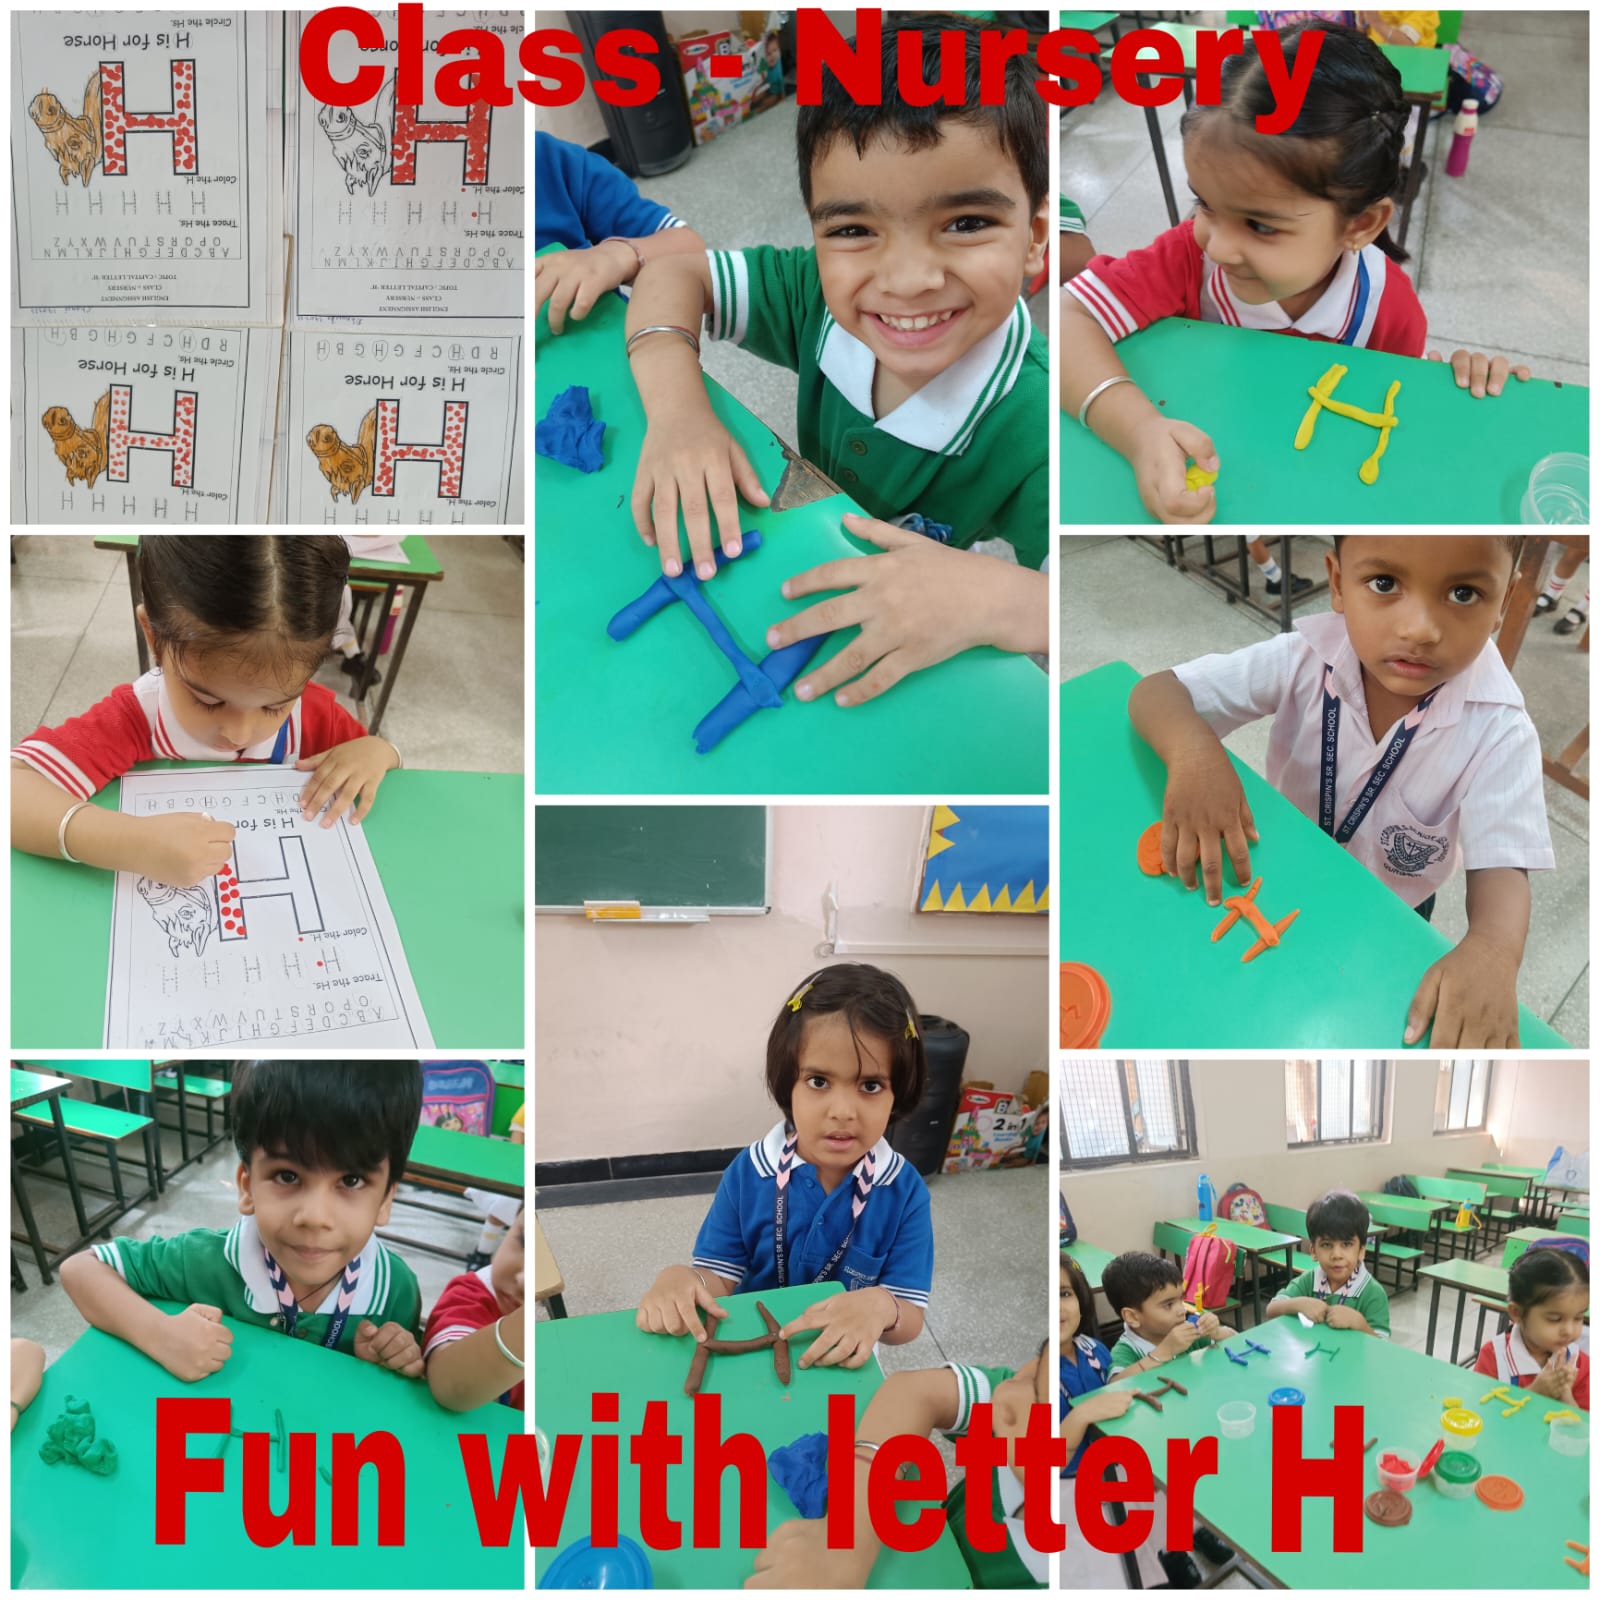 CLASS NURSERY ACTIVITY 'FUN WITH LETTER H'